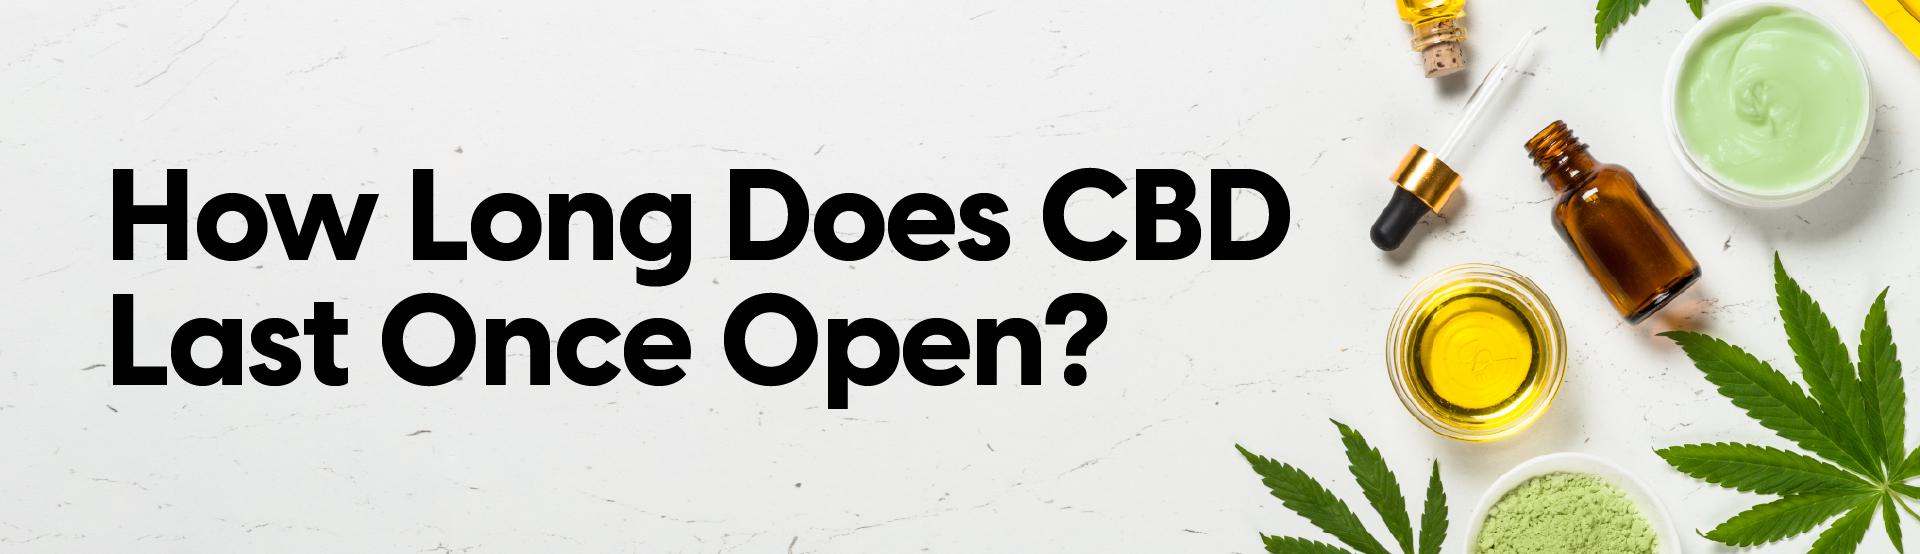 How Long Does CBD Oil Last Once Open? - Image of CBD products